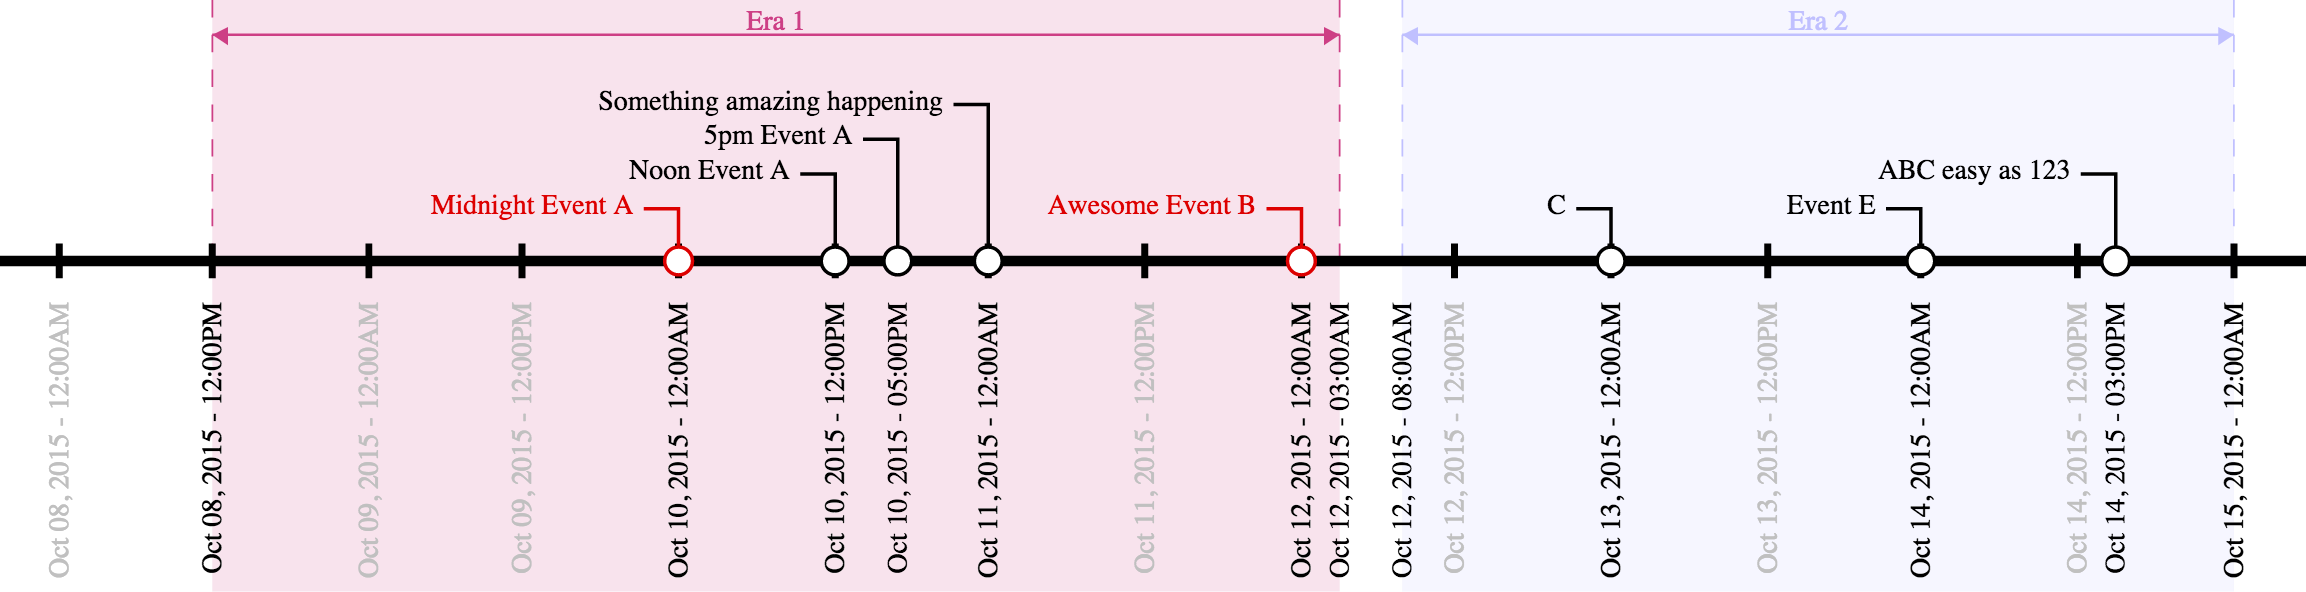 simple timeline example